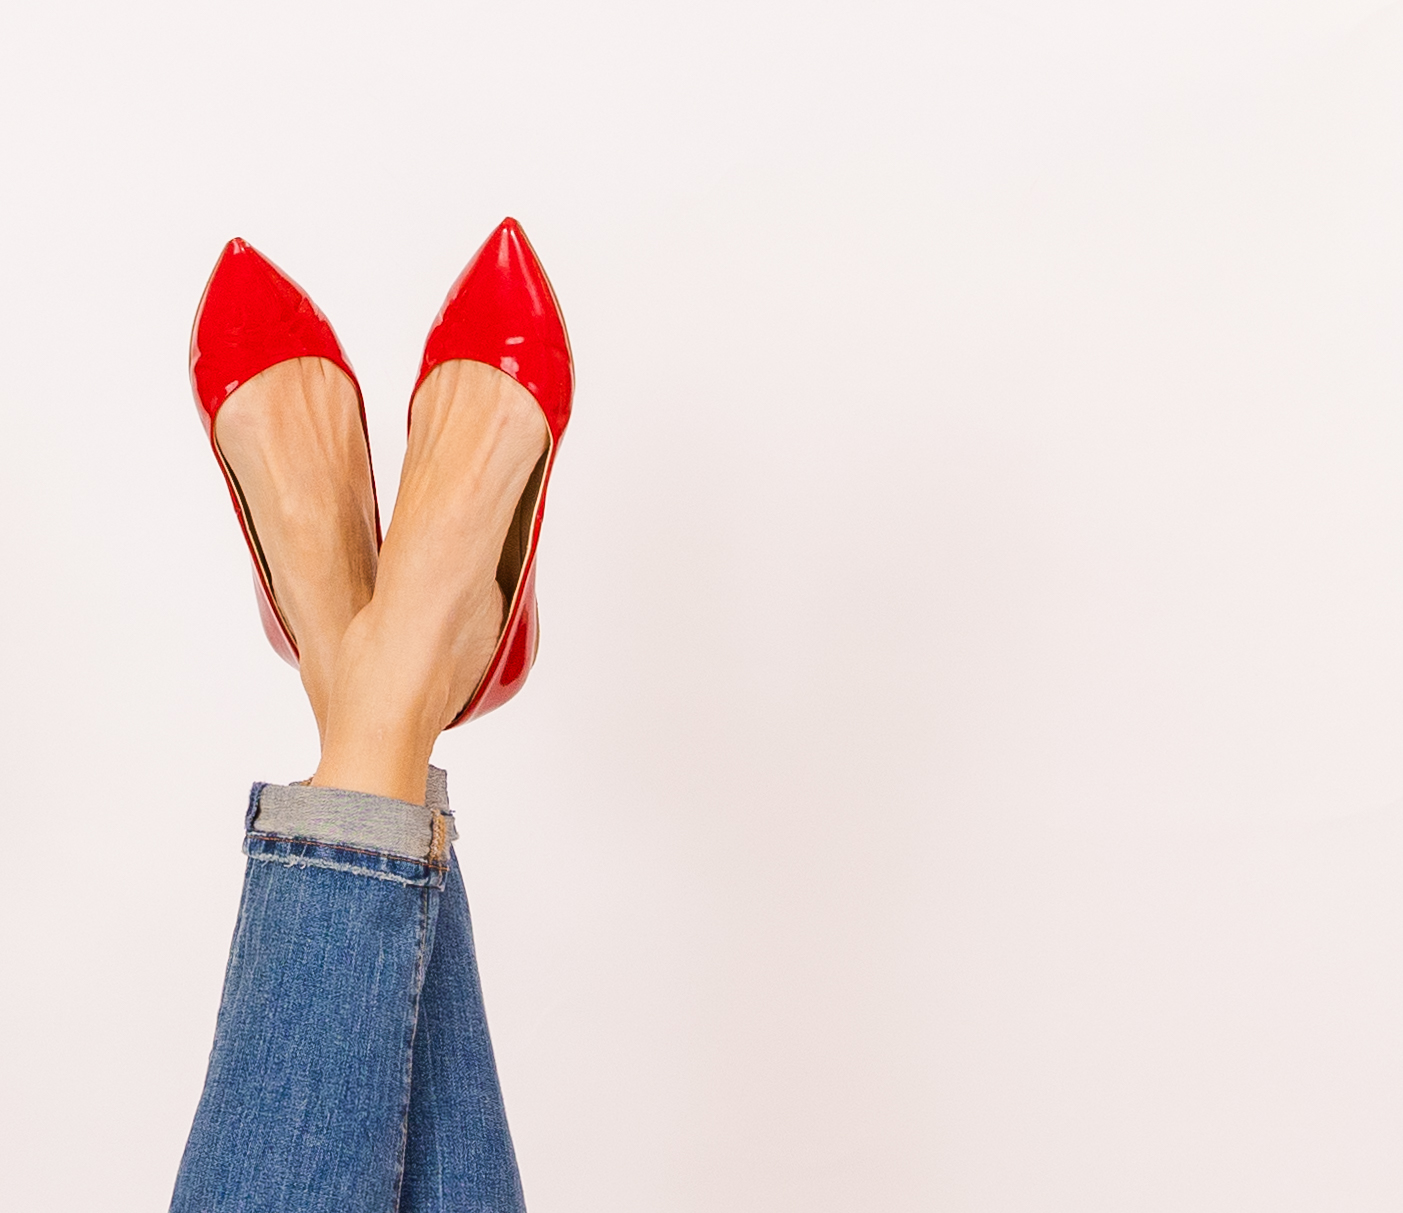 women's legs with jeans and flat shinny red shoes on the left of the frame white negative space for overlay text on the right